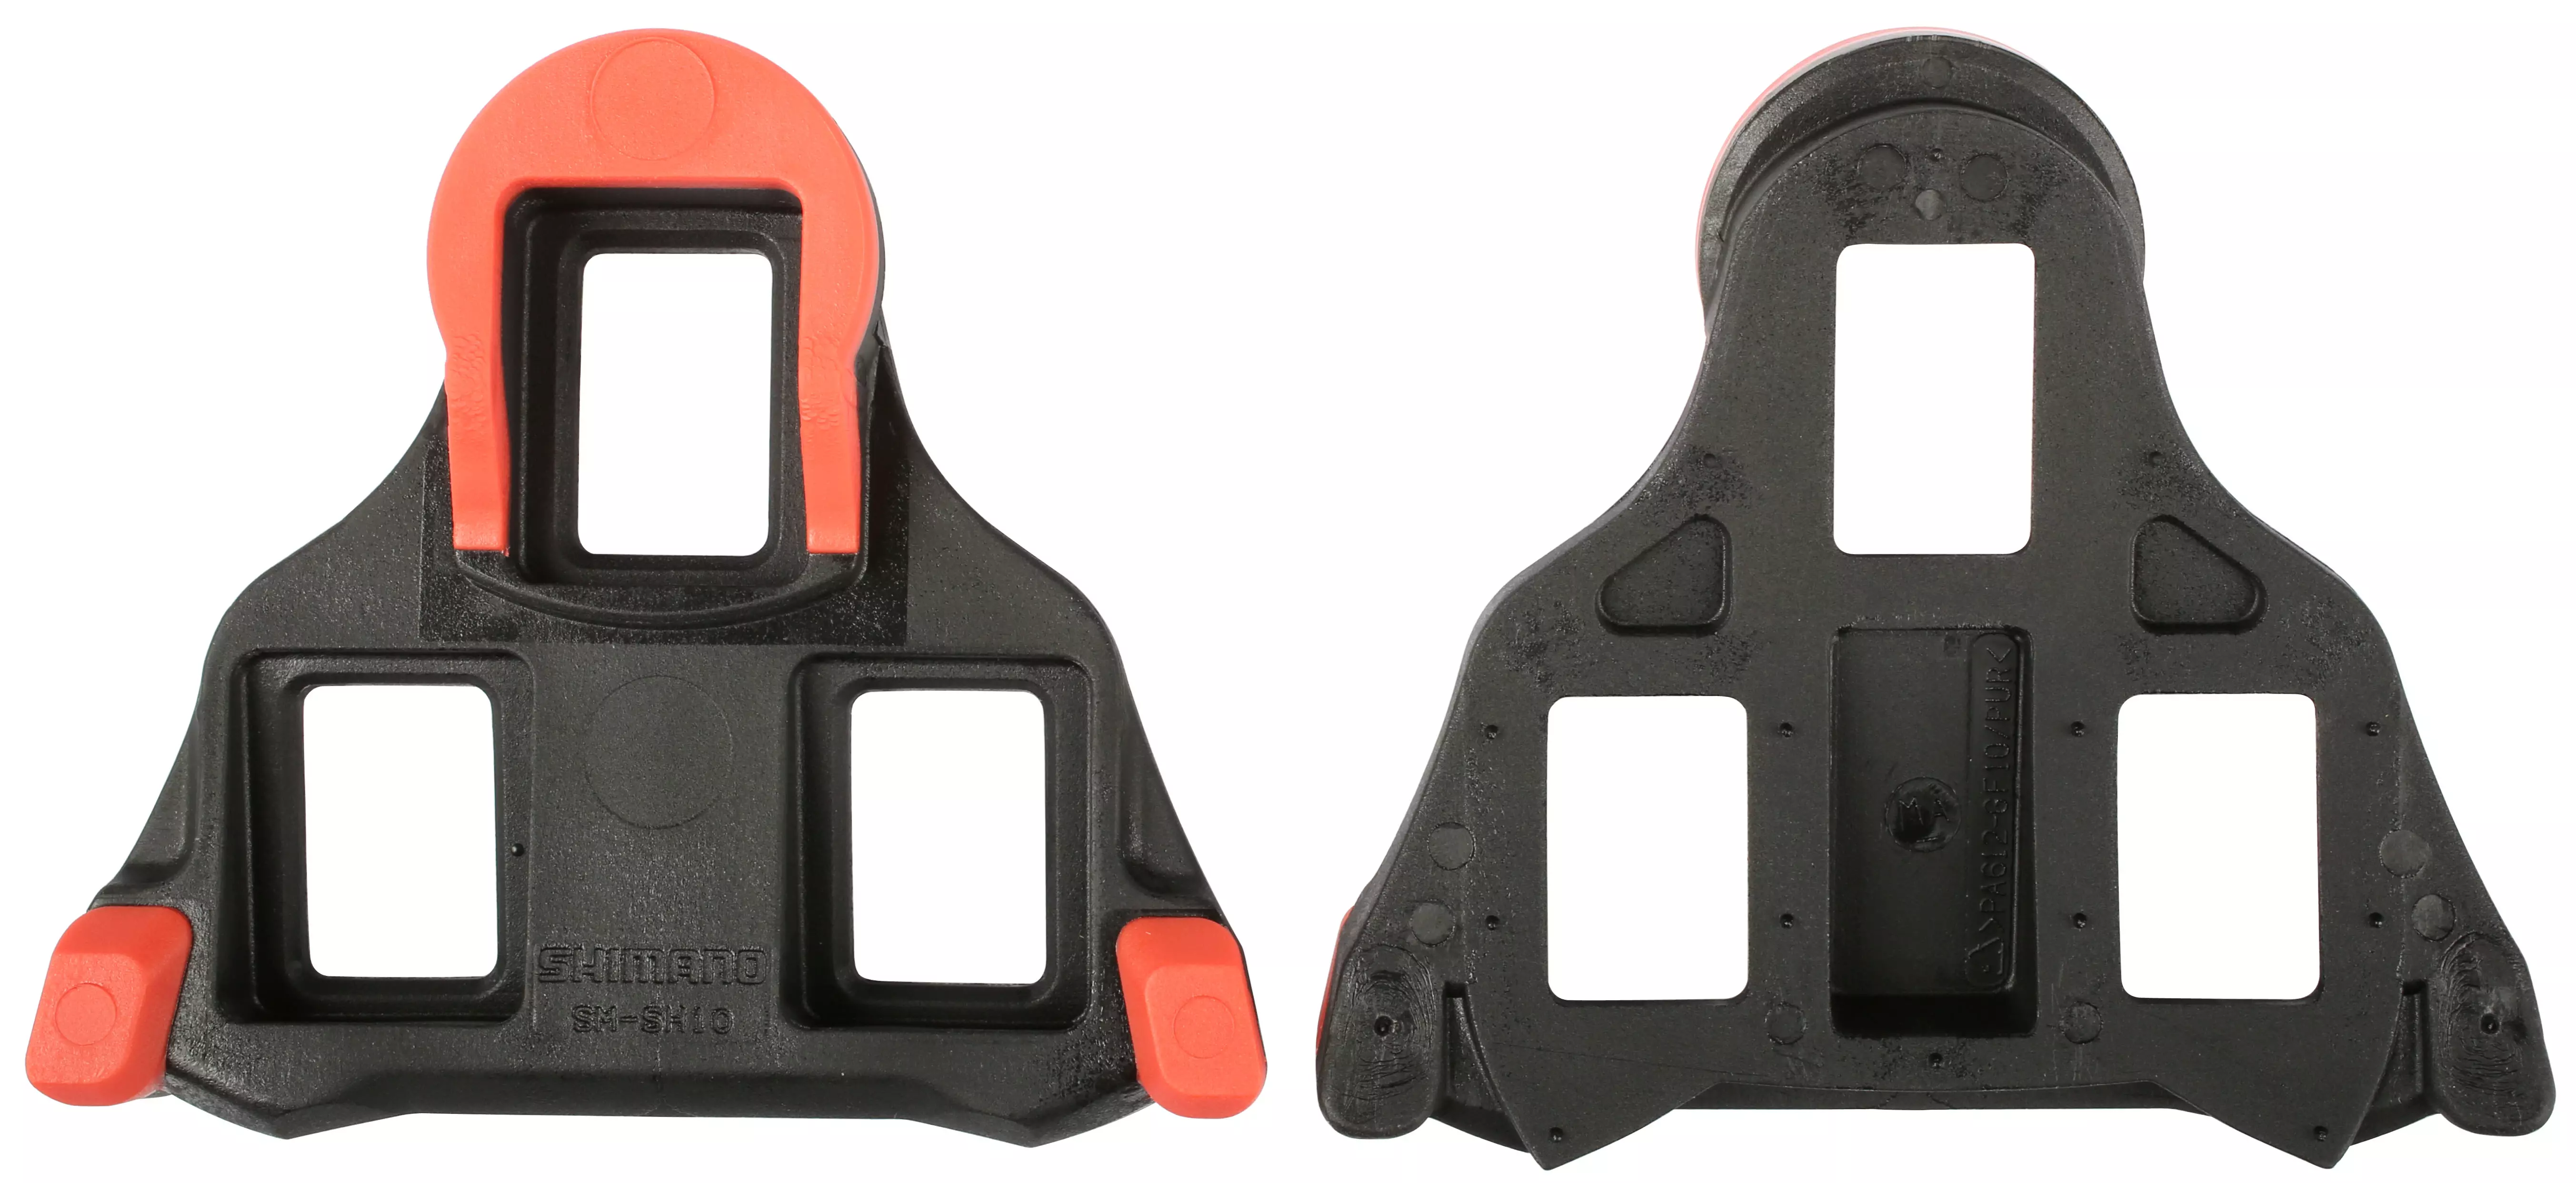 spd cleat covers halfords